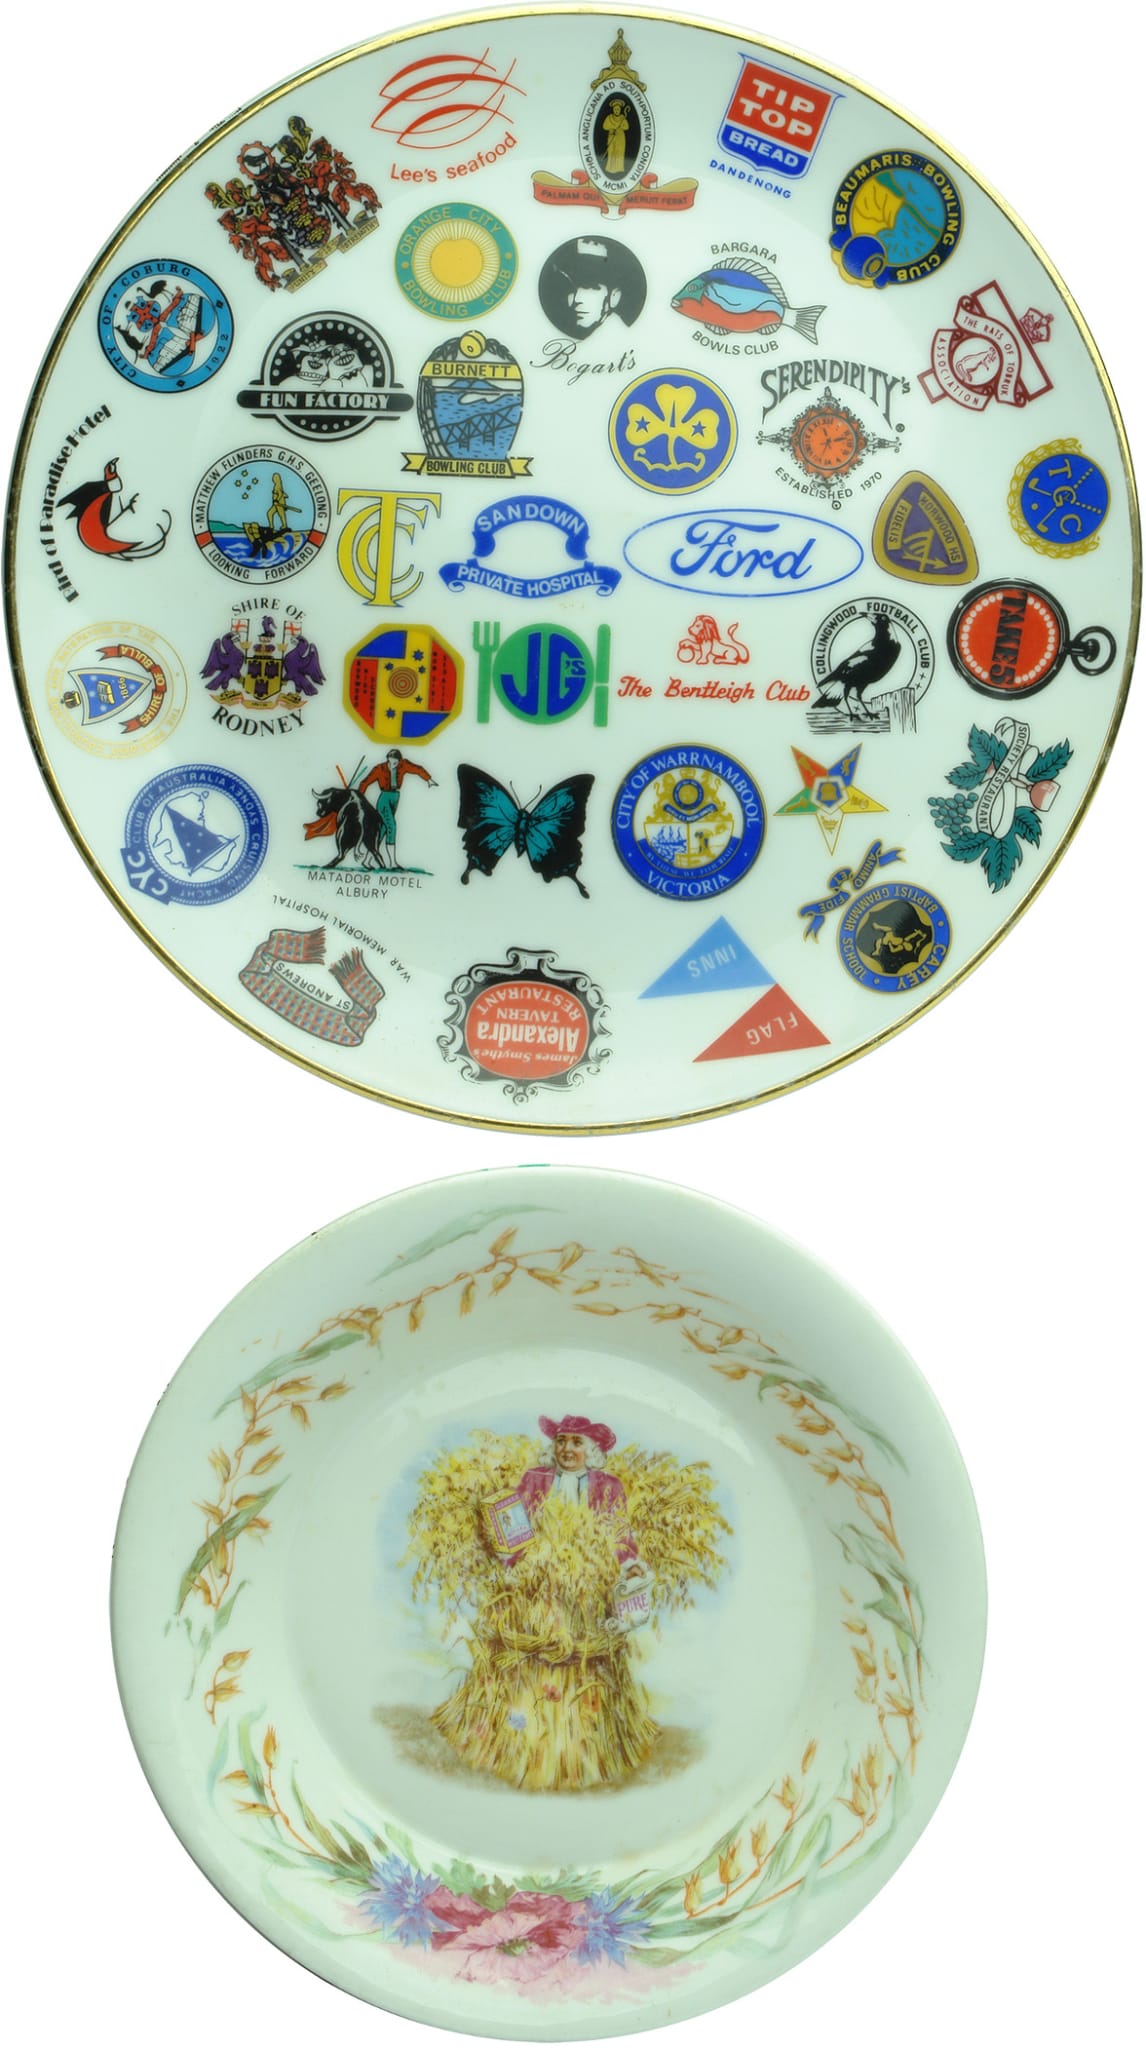 Old Advertising Plates